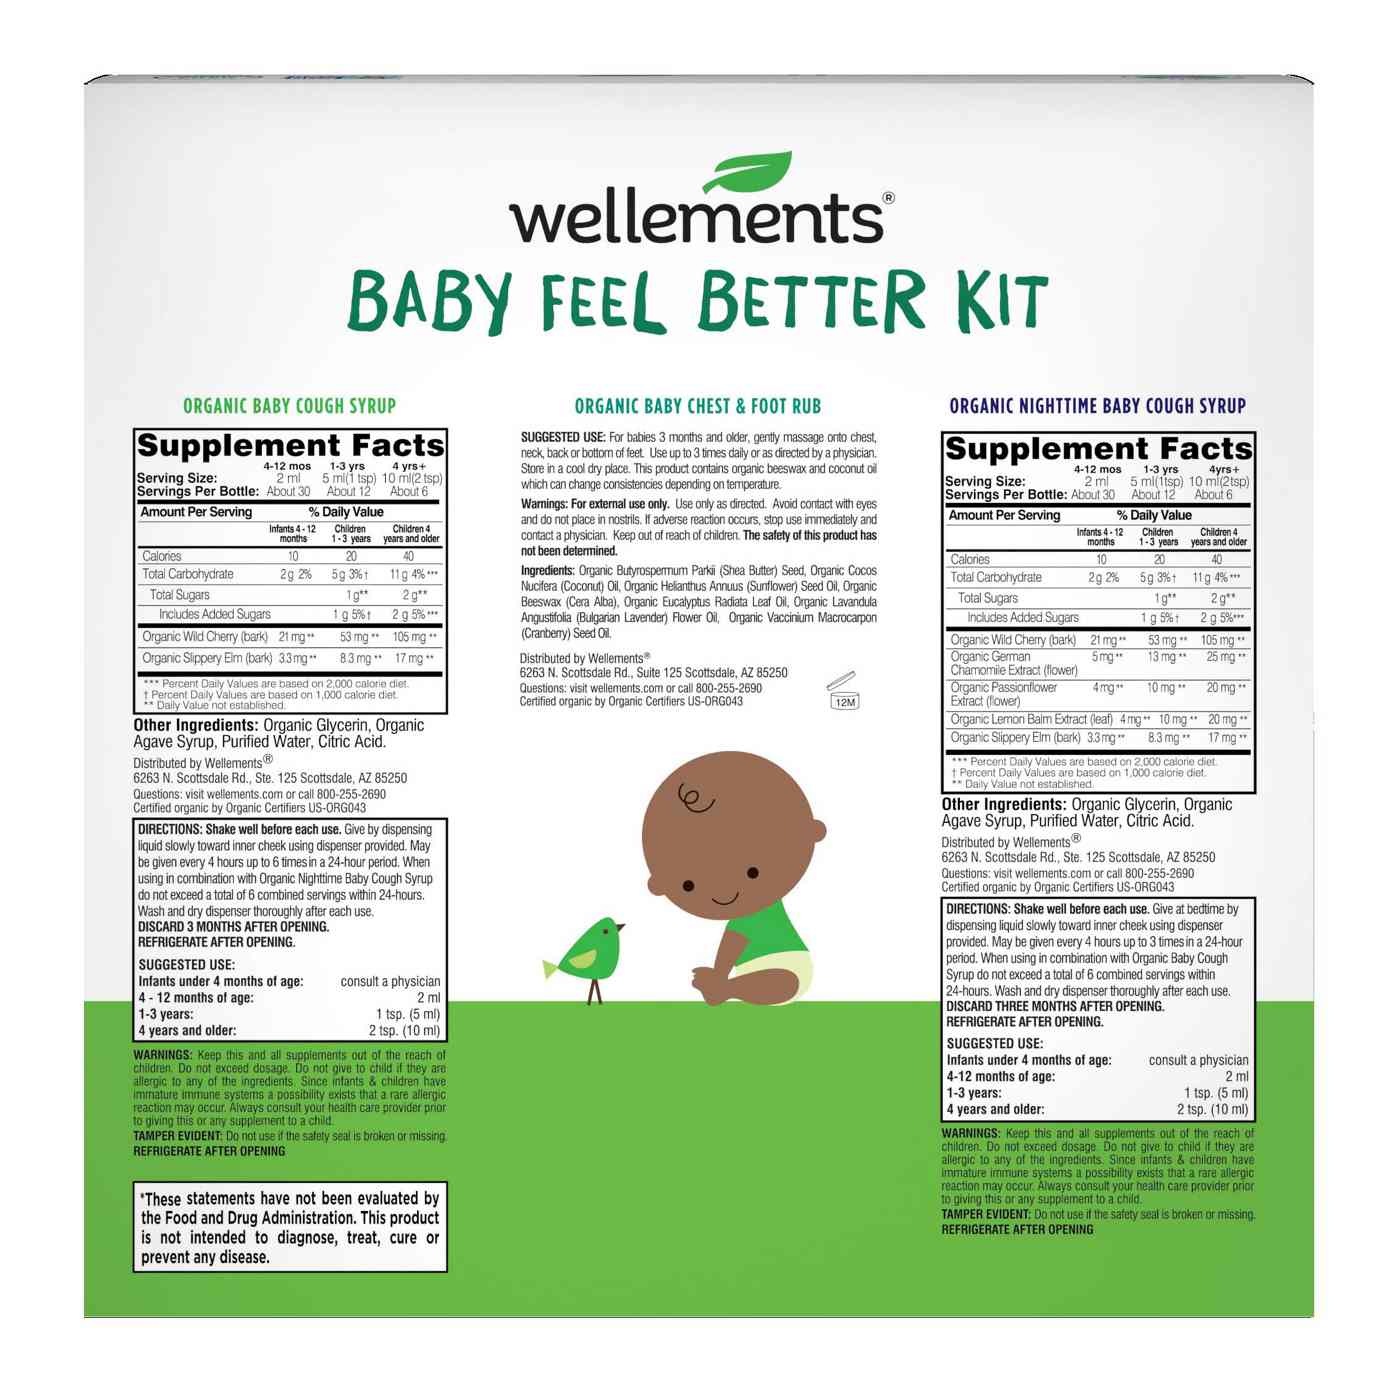 Wellements Baby Feel Better Kit; image 2 of 2